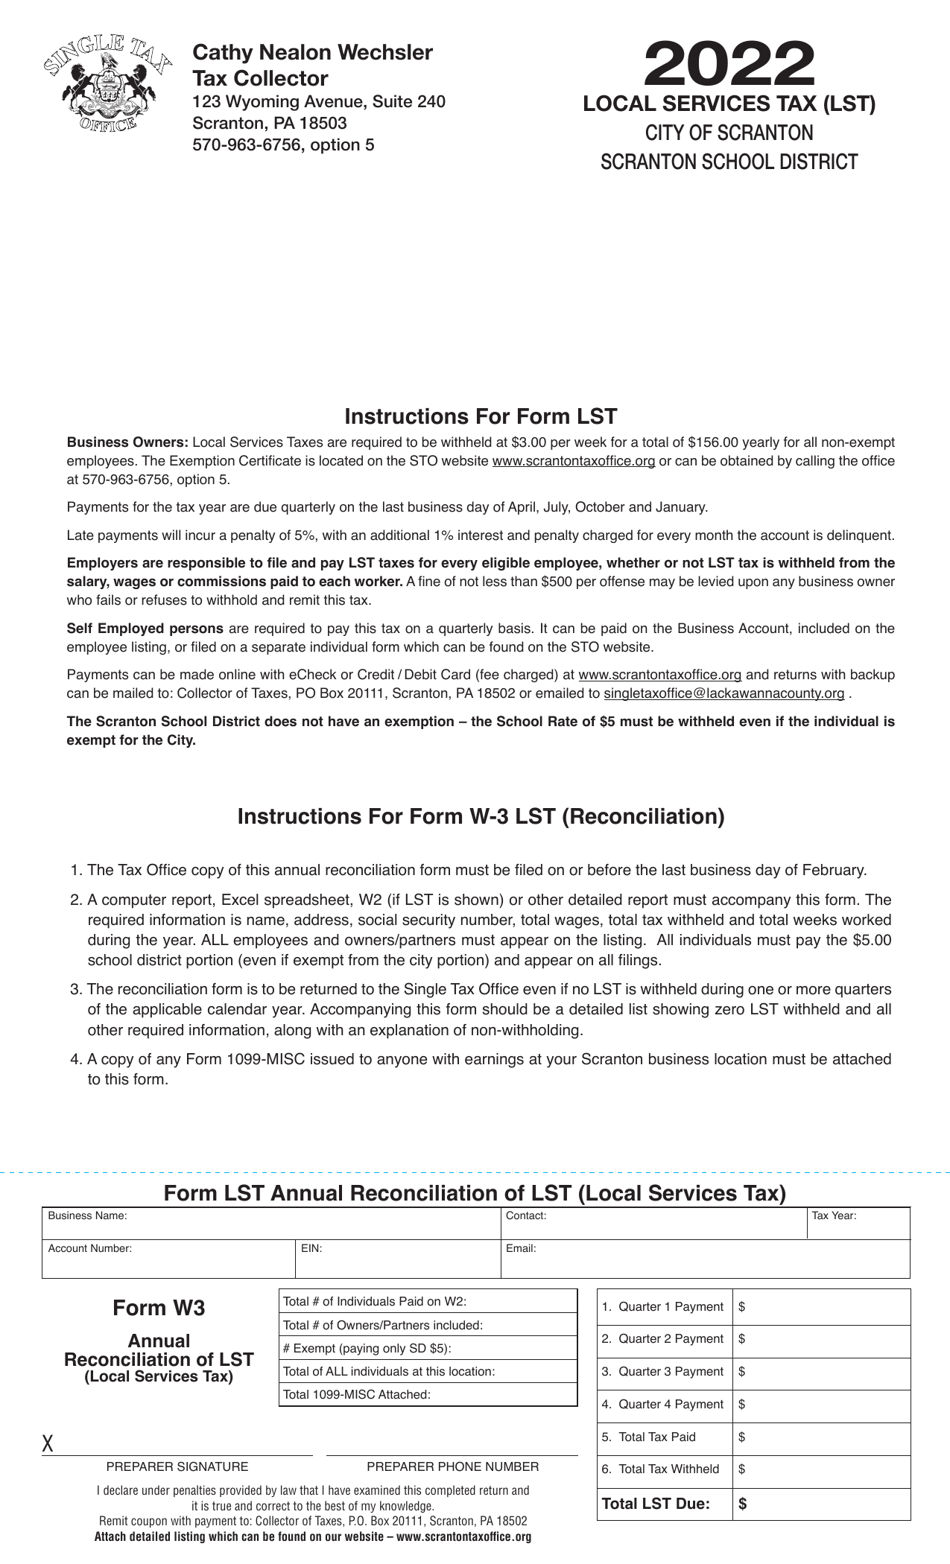 Form LST (W-3 LST) Annual Reconciliation of Lst (Local Services Tax) - City of Scranton, Pennsylvania, Page 1